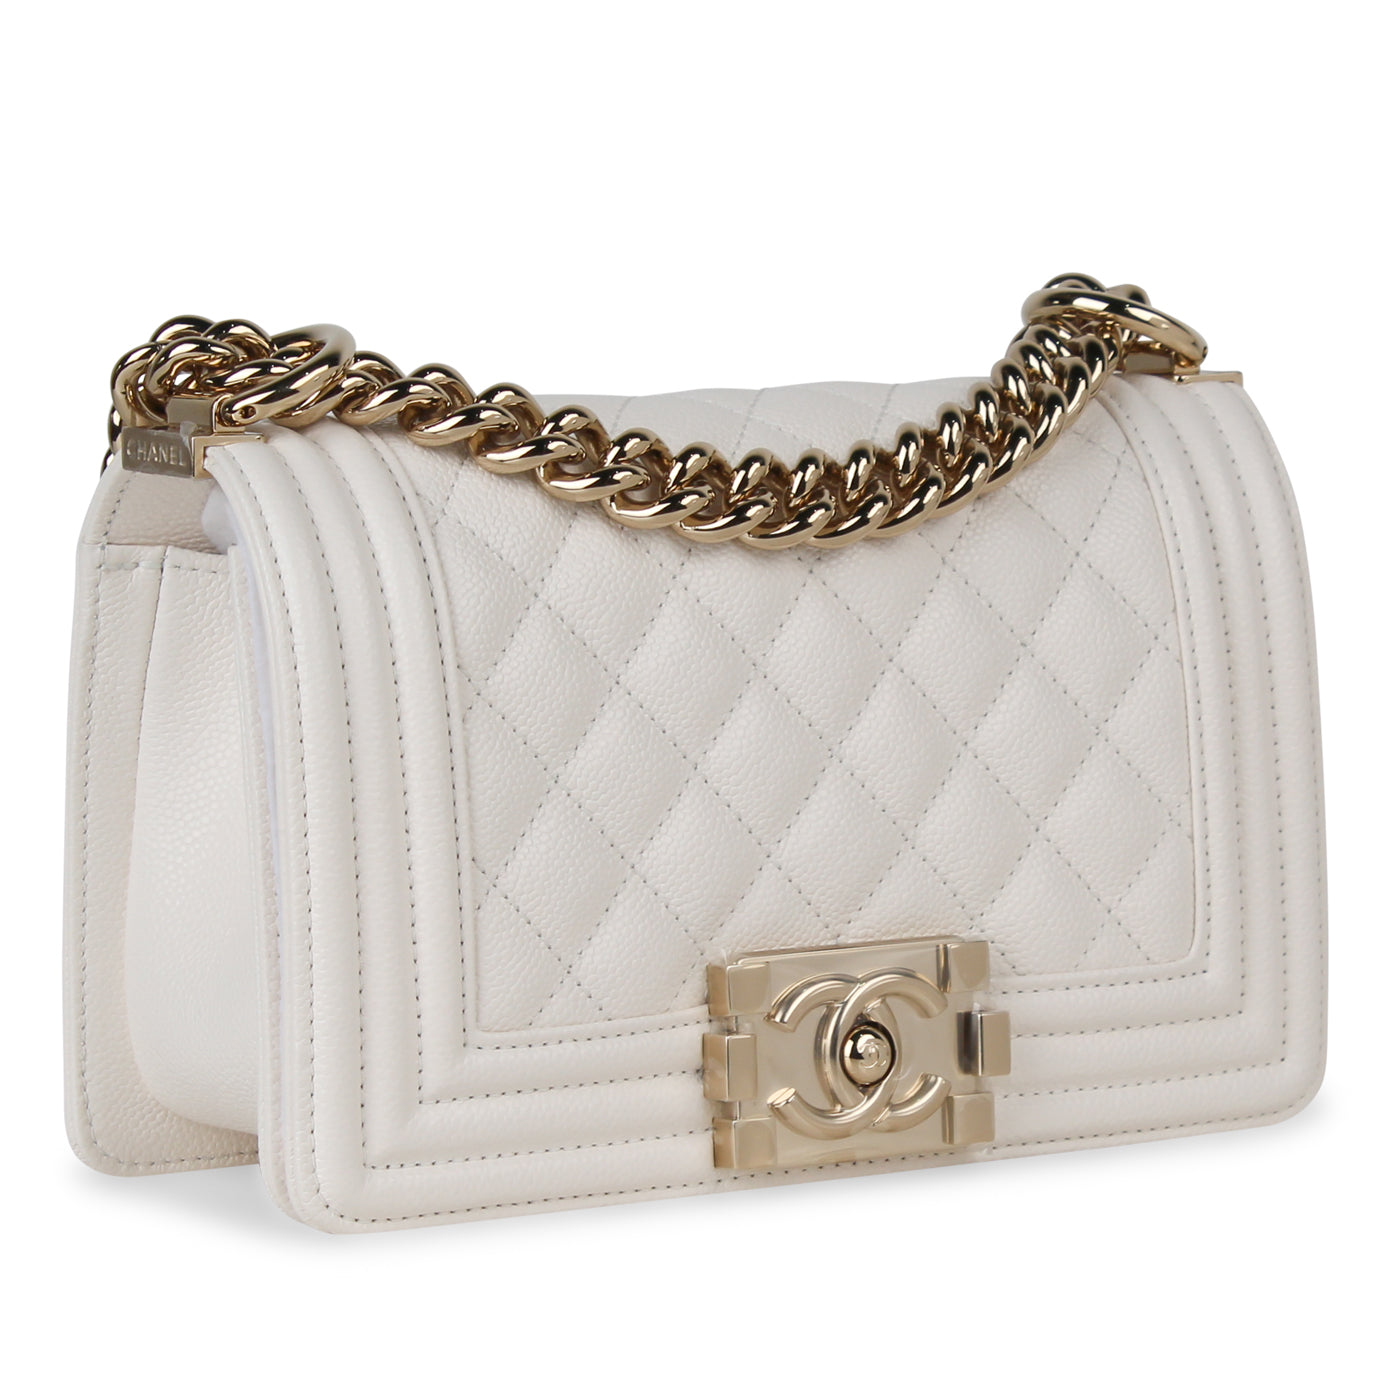 Chanel  Small Boy Bag  White Caviar Leather  CGHW  New  Bagista